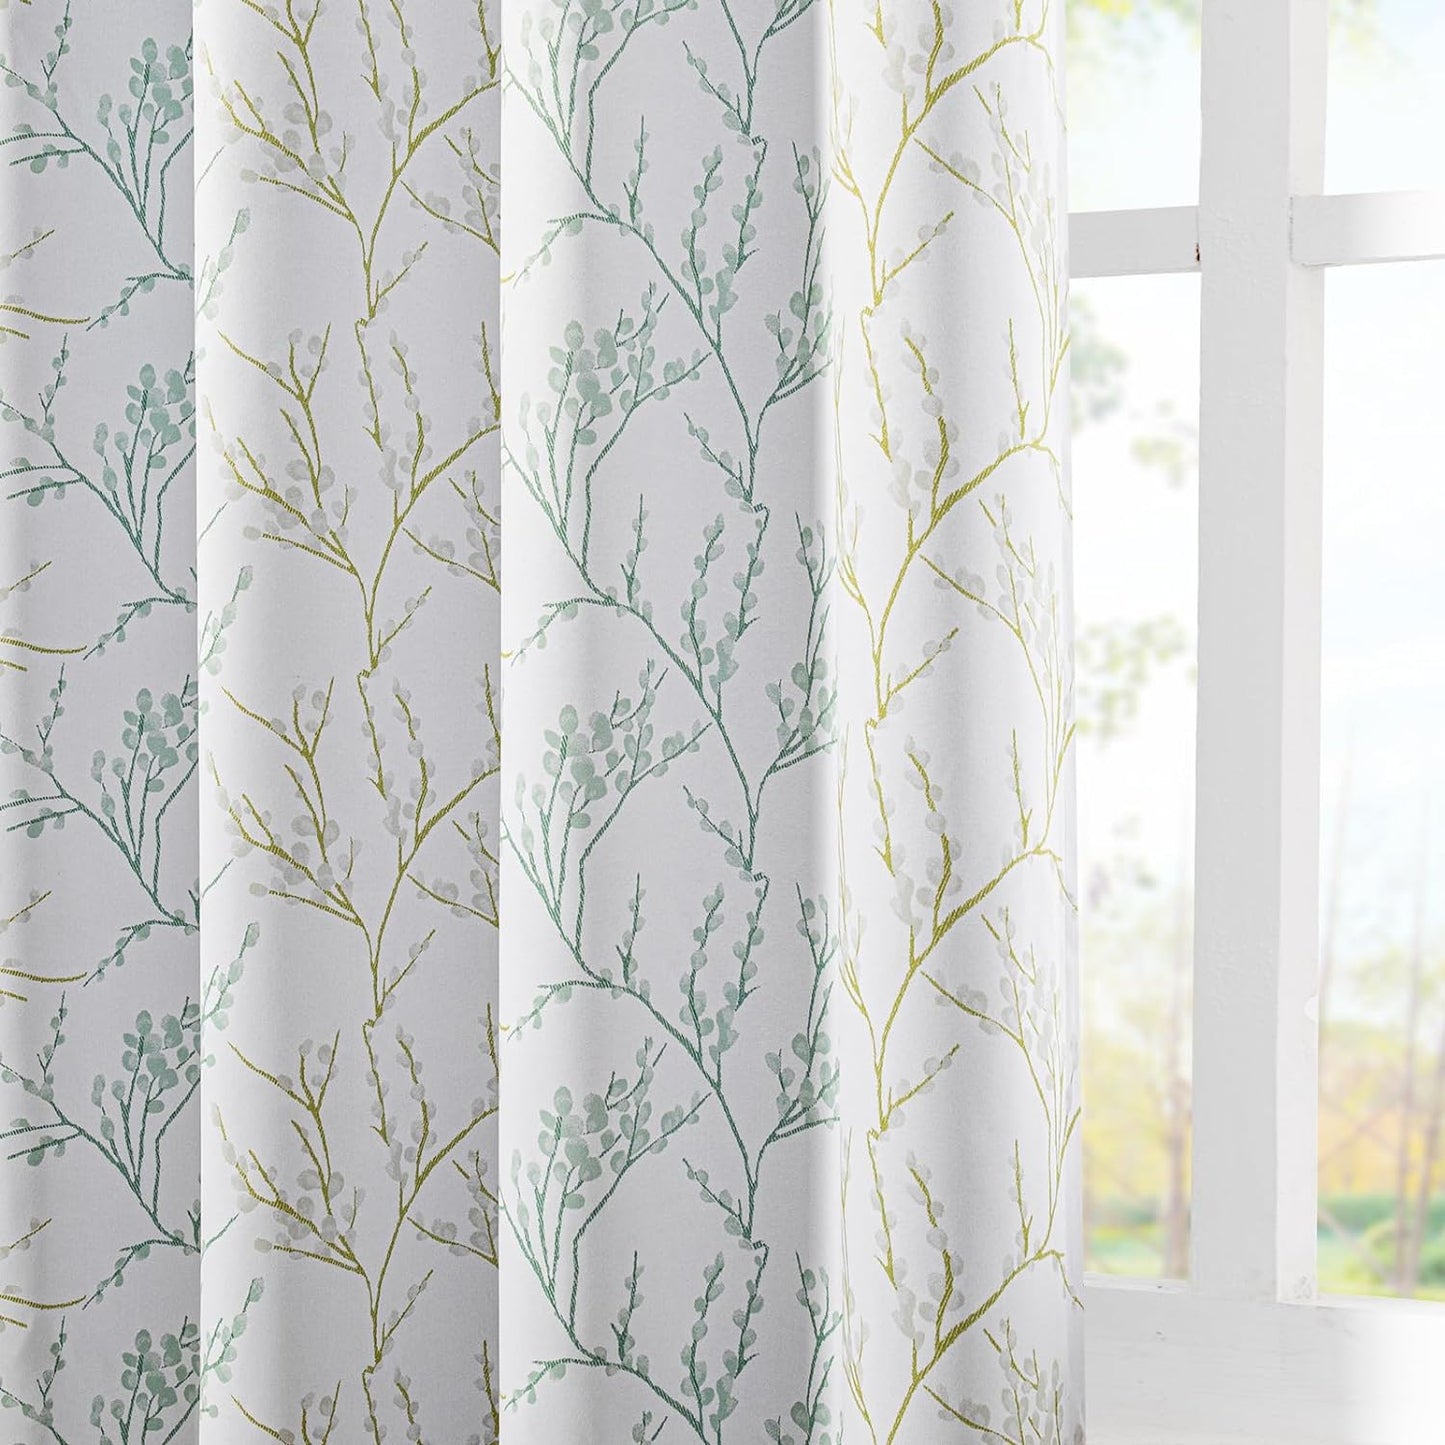 MYSKY HOME Living Room Curtains 84 Inches Long Thermal Insulated Room Darkening Curtains for Dining Room Patio Leaf Pattern Grommet Drapes for Bedroom, Sage, 2 Pieces  MYSKY HOME Branch-Green 52"W X 84"L 